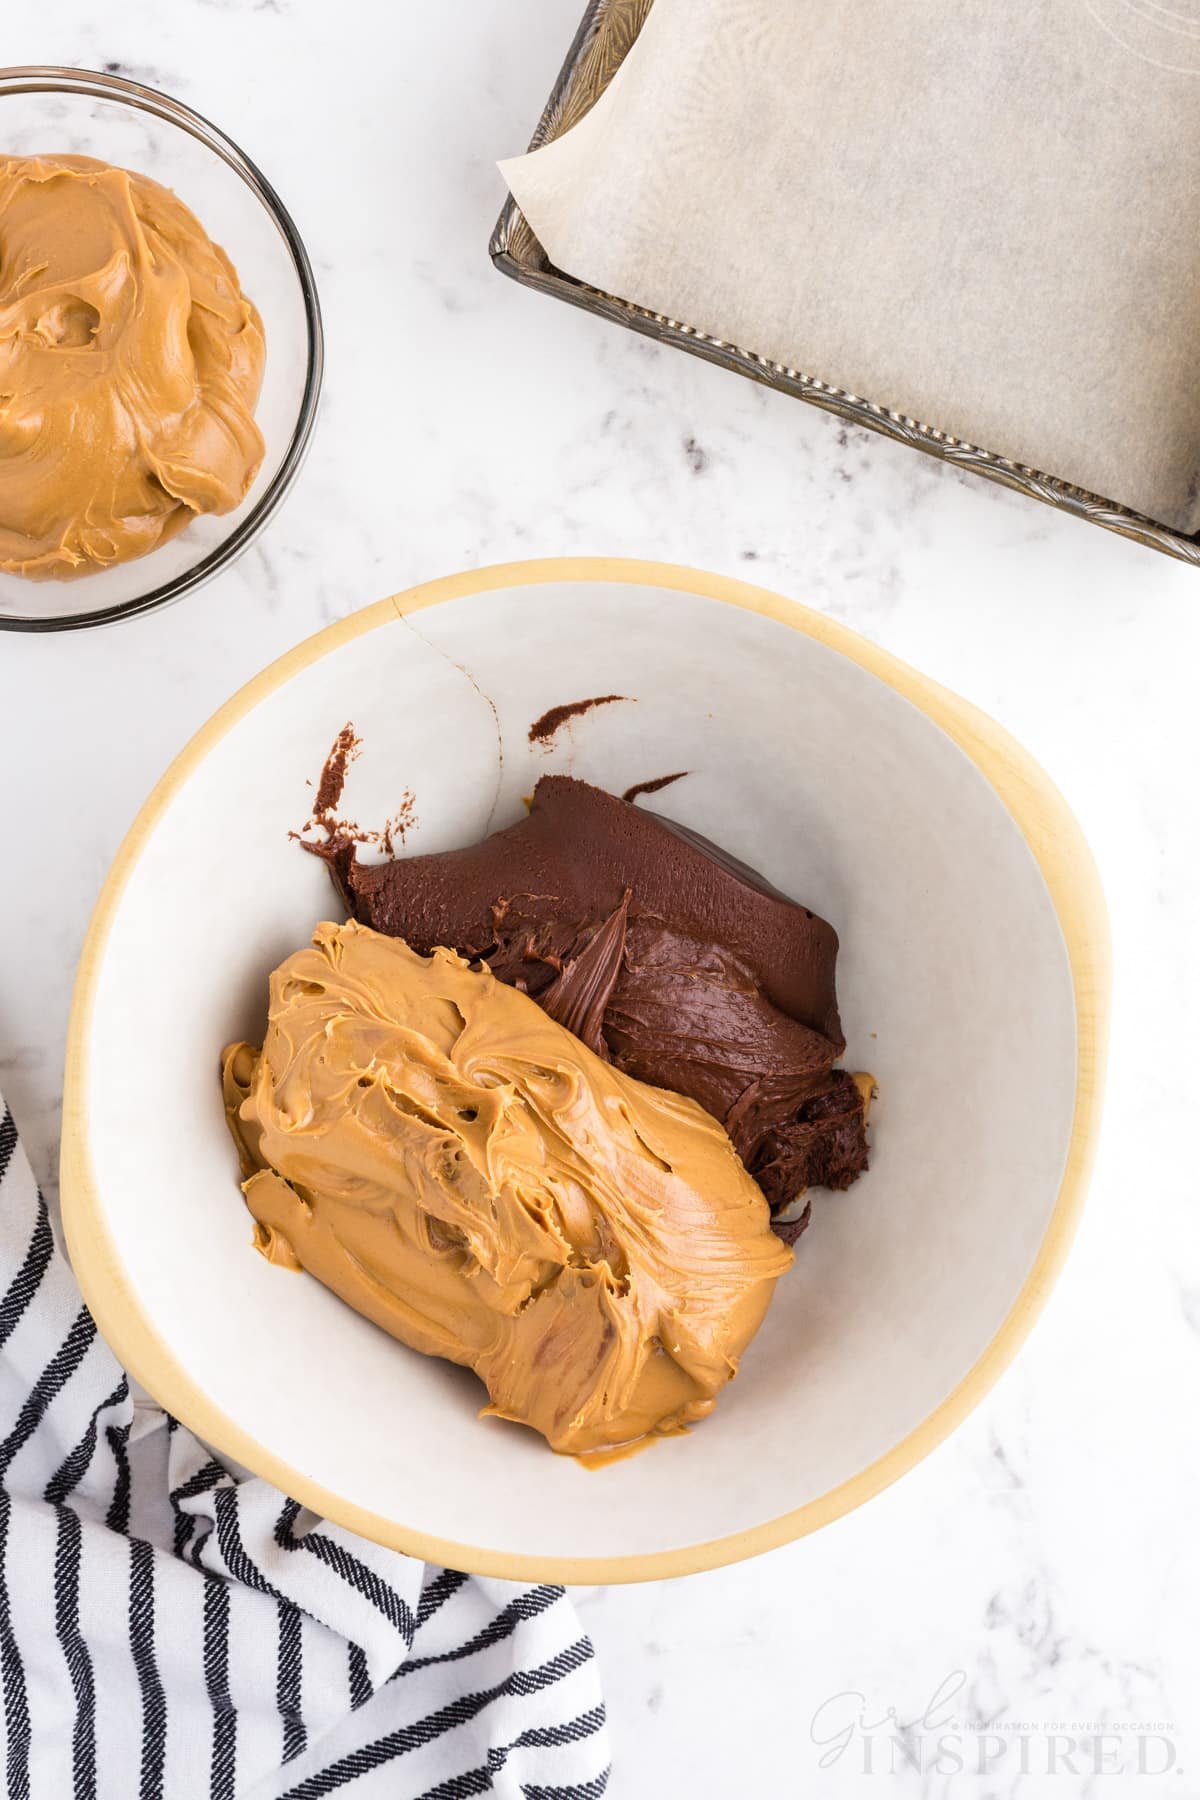 Mixing bowl with creamy peanut butter and chocolate frosting, glass bowl with remaining peanut butter, striped linen, metal baking tray lined with parchment paper, on a marble countertop.